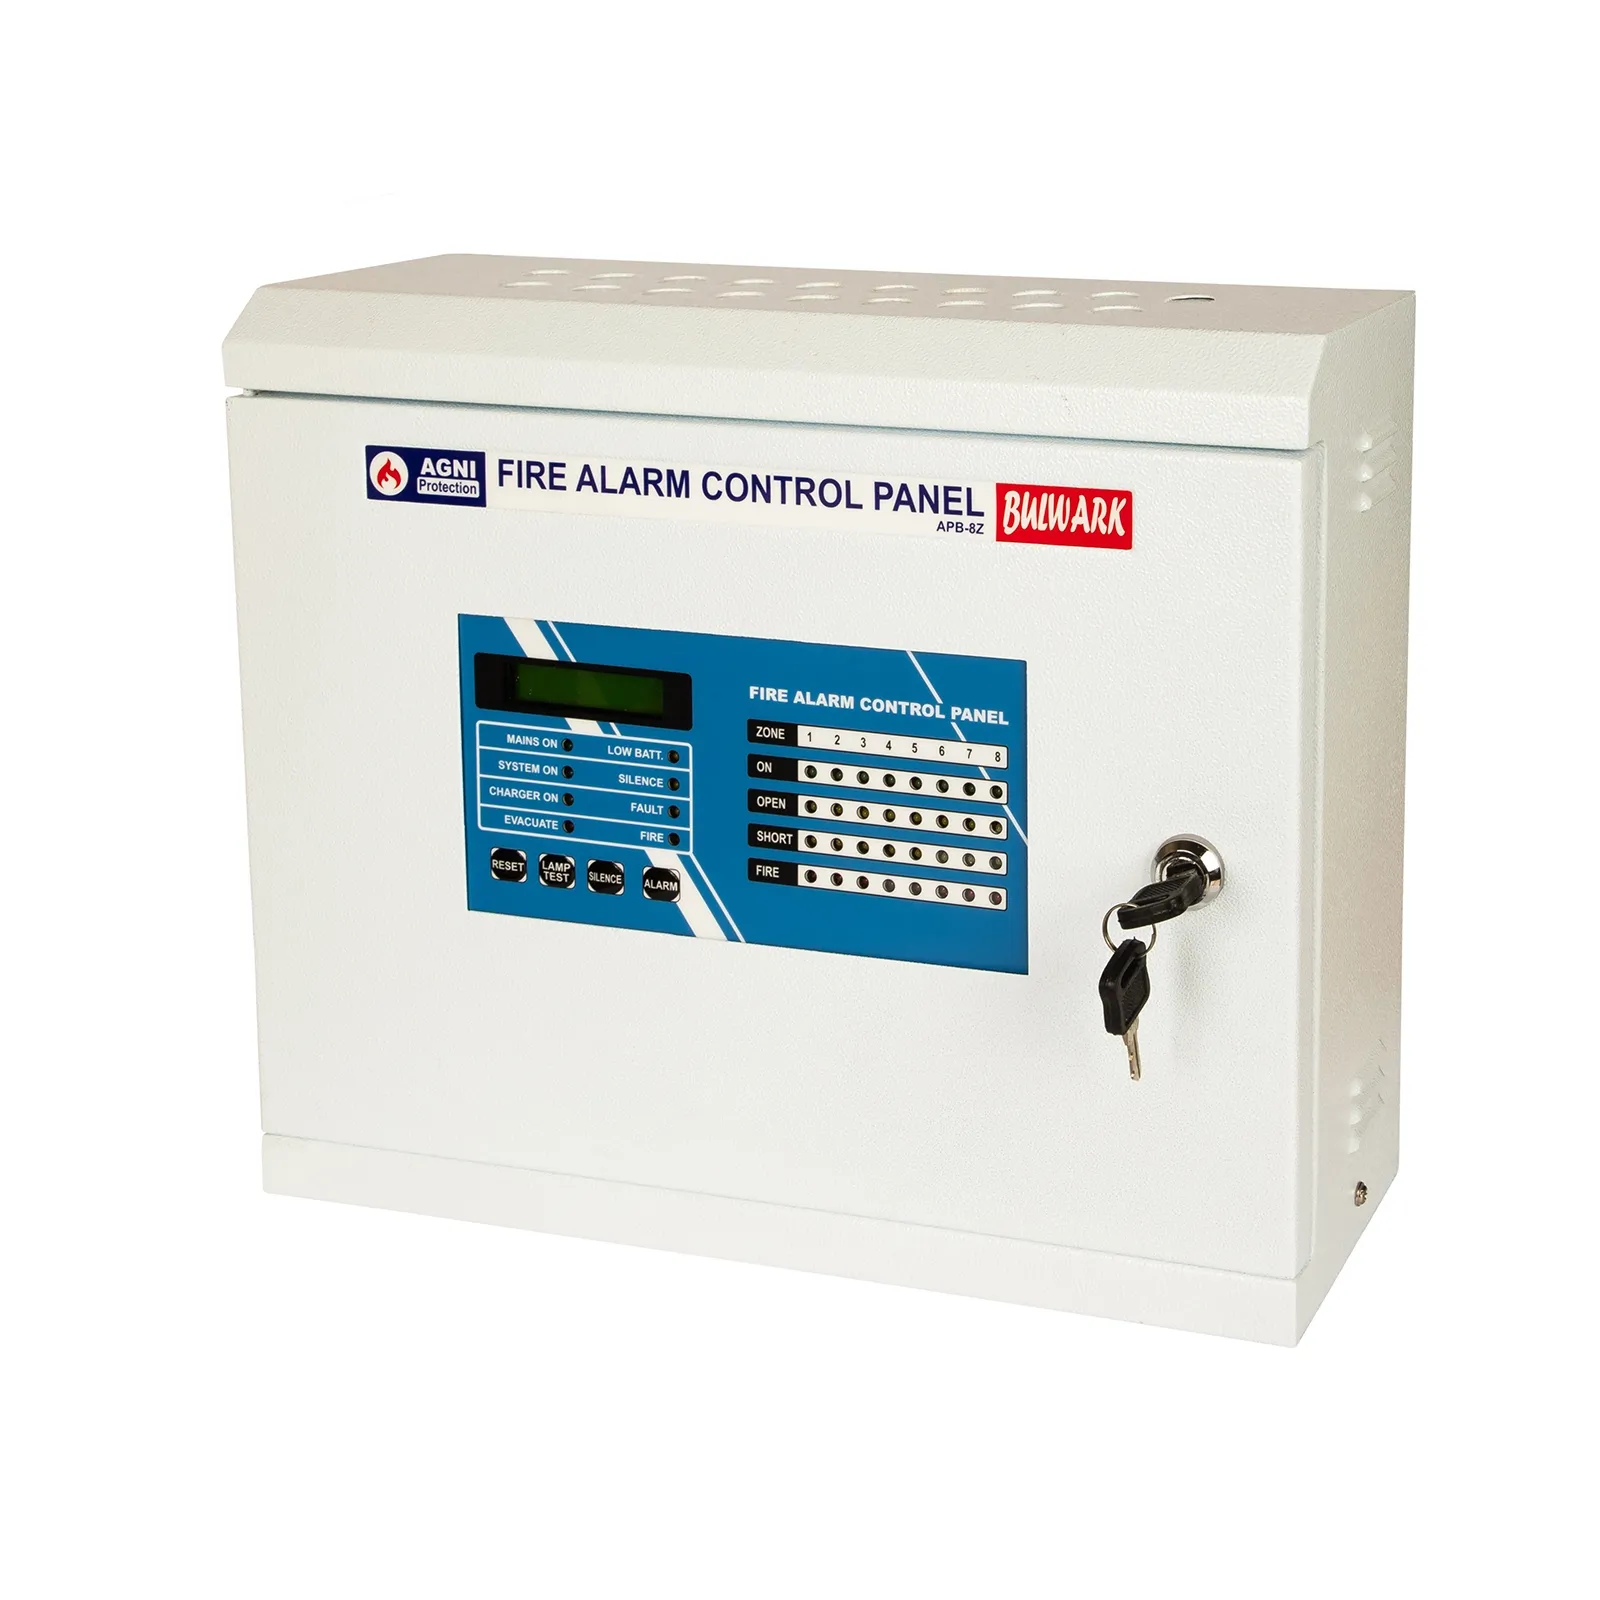 8 ZONE CONVENTIONAL FIRE ALARM PANEL